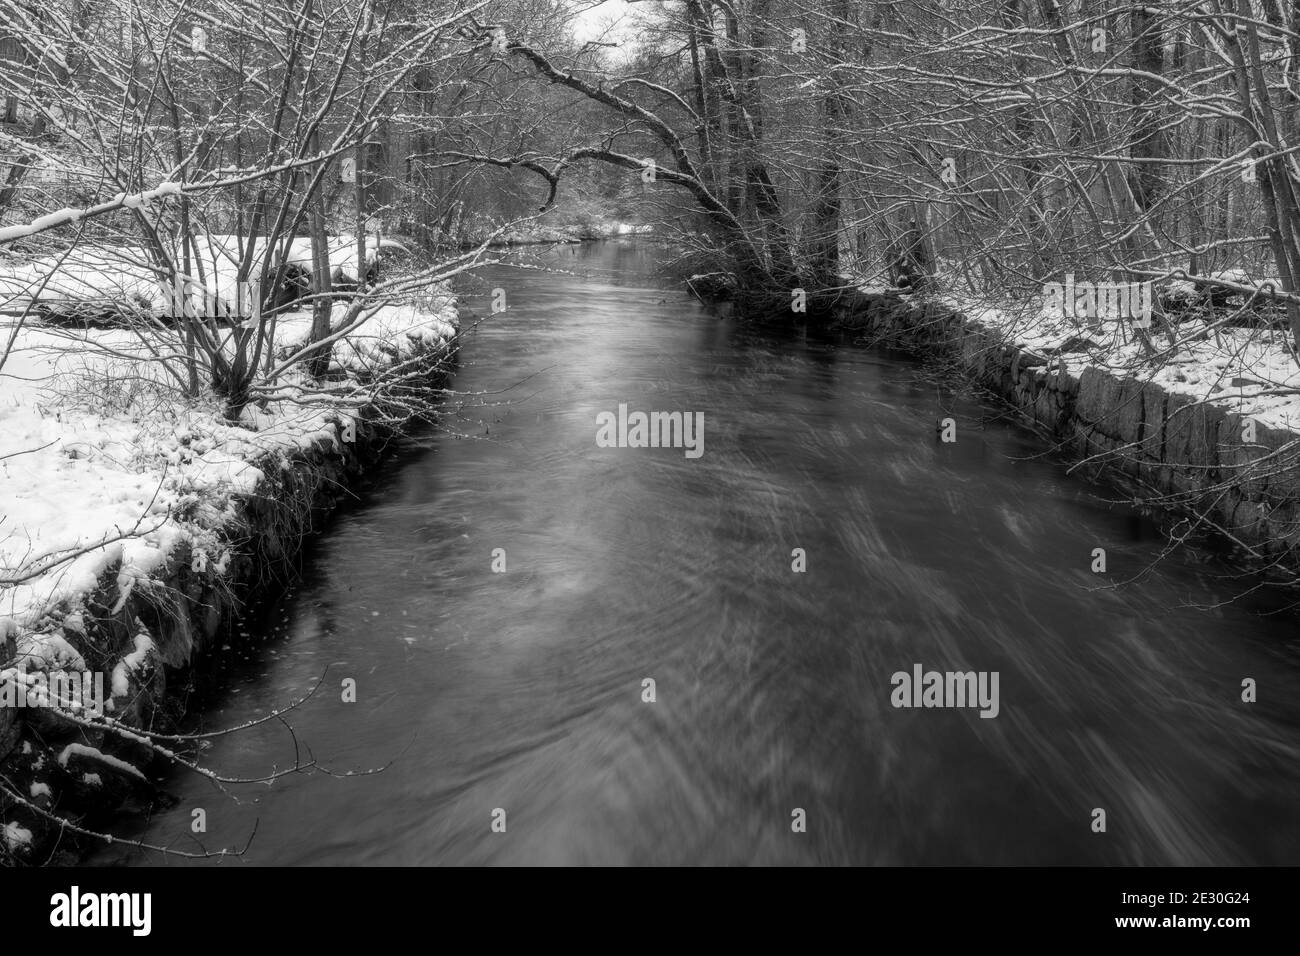 A river floating through a snowy winter forest. Picture Ronne River, Scania county, Sweden Stock Photo